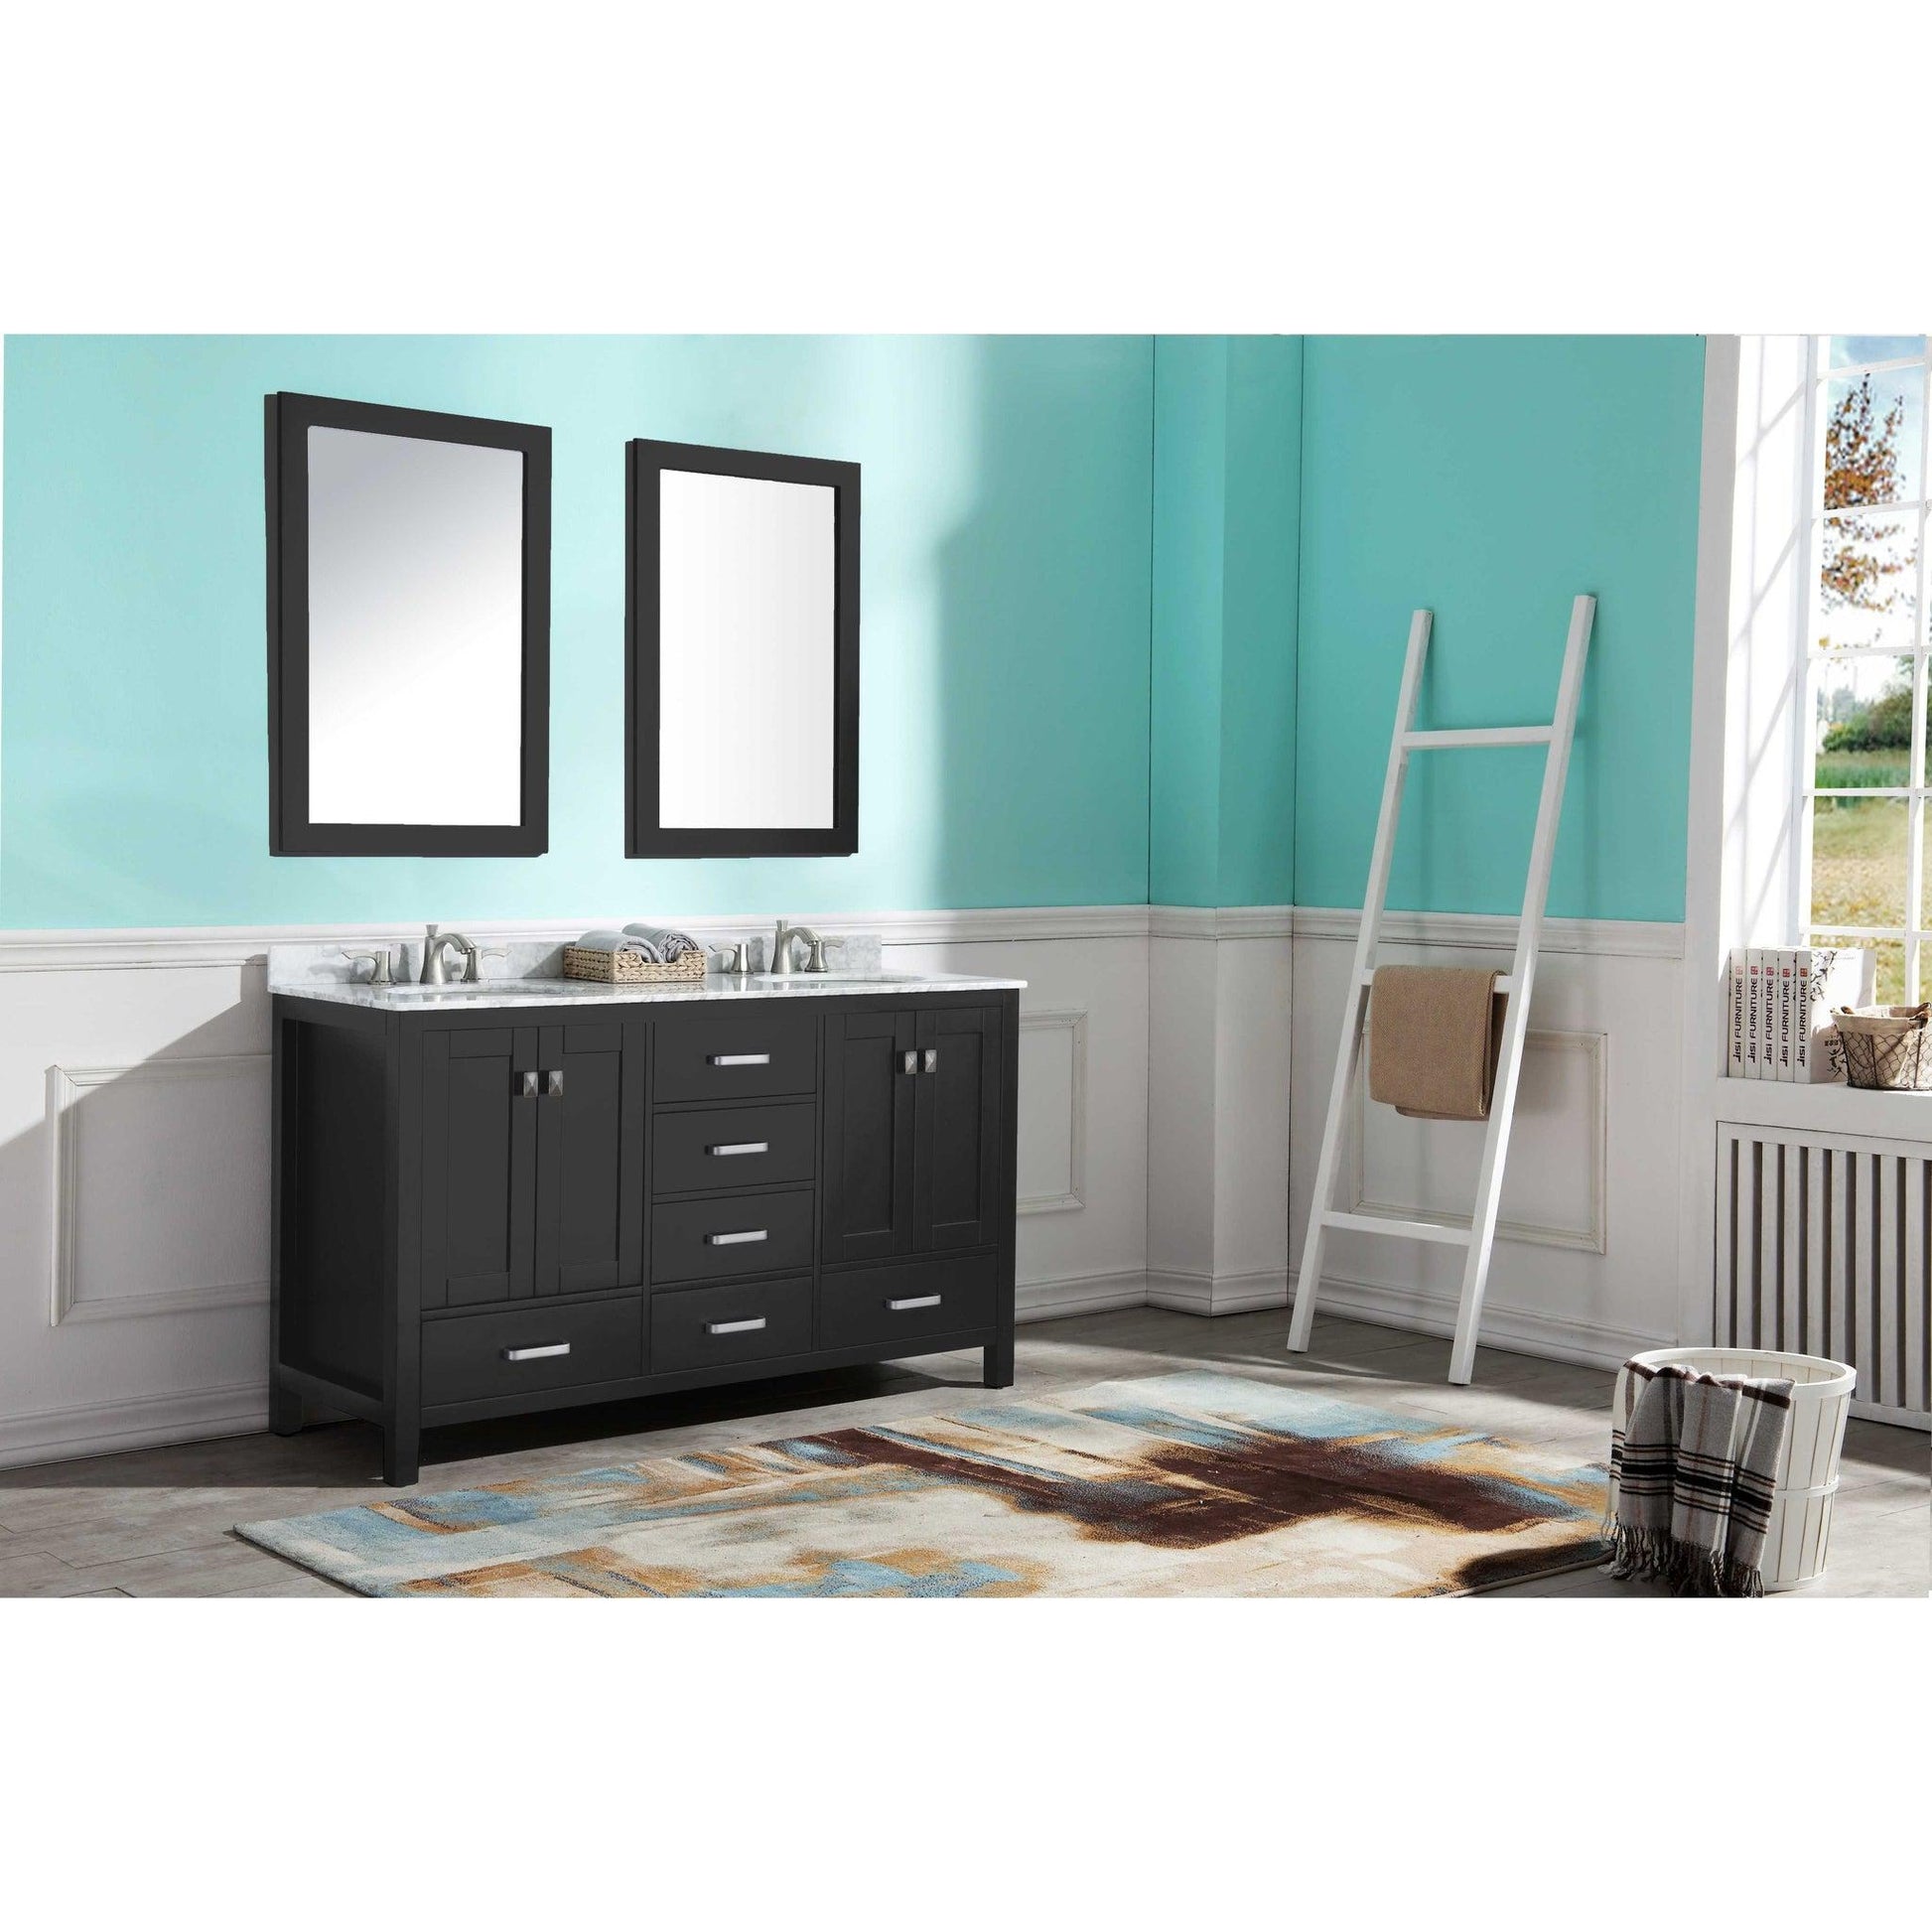 ANZZI Chateau Series 60" x 36" Rich Black Solid Wood Bathroom Vanity With White Carrara Marble Countertop, Basin Sink and Mirror